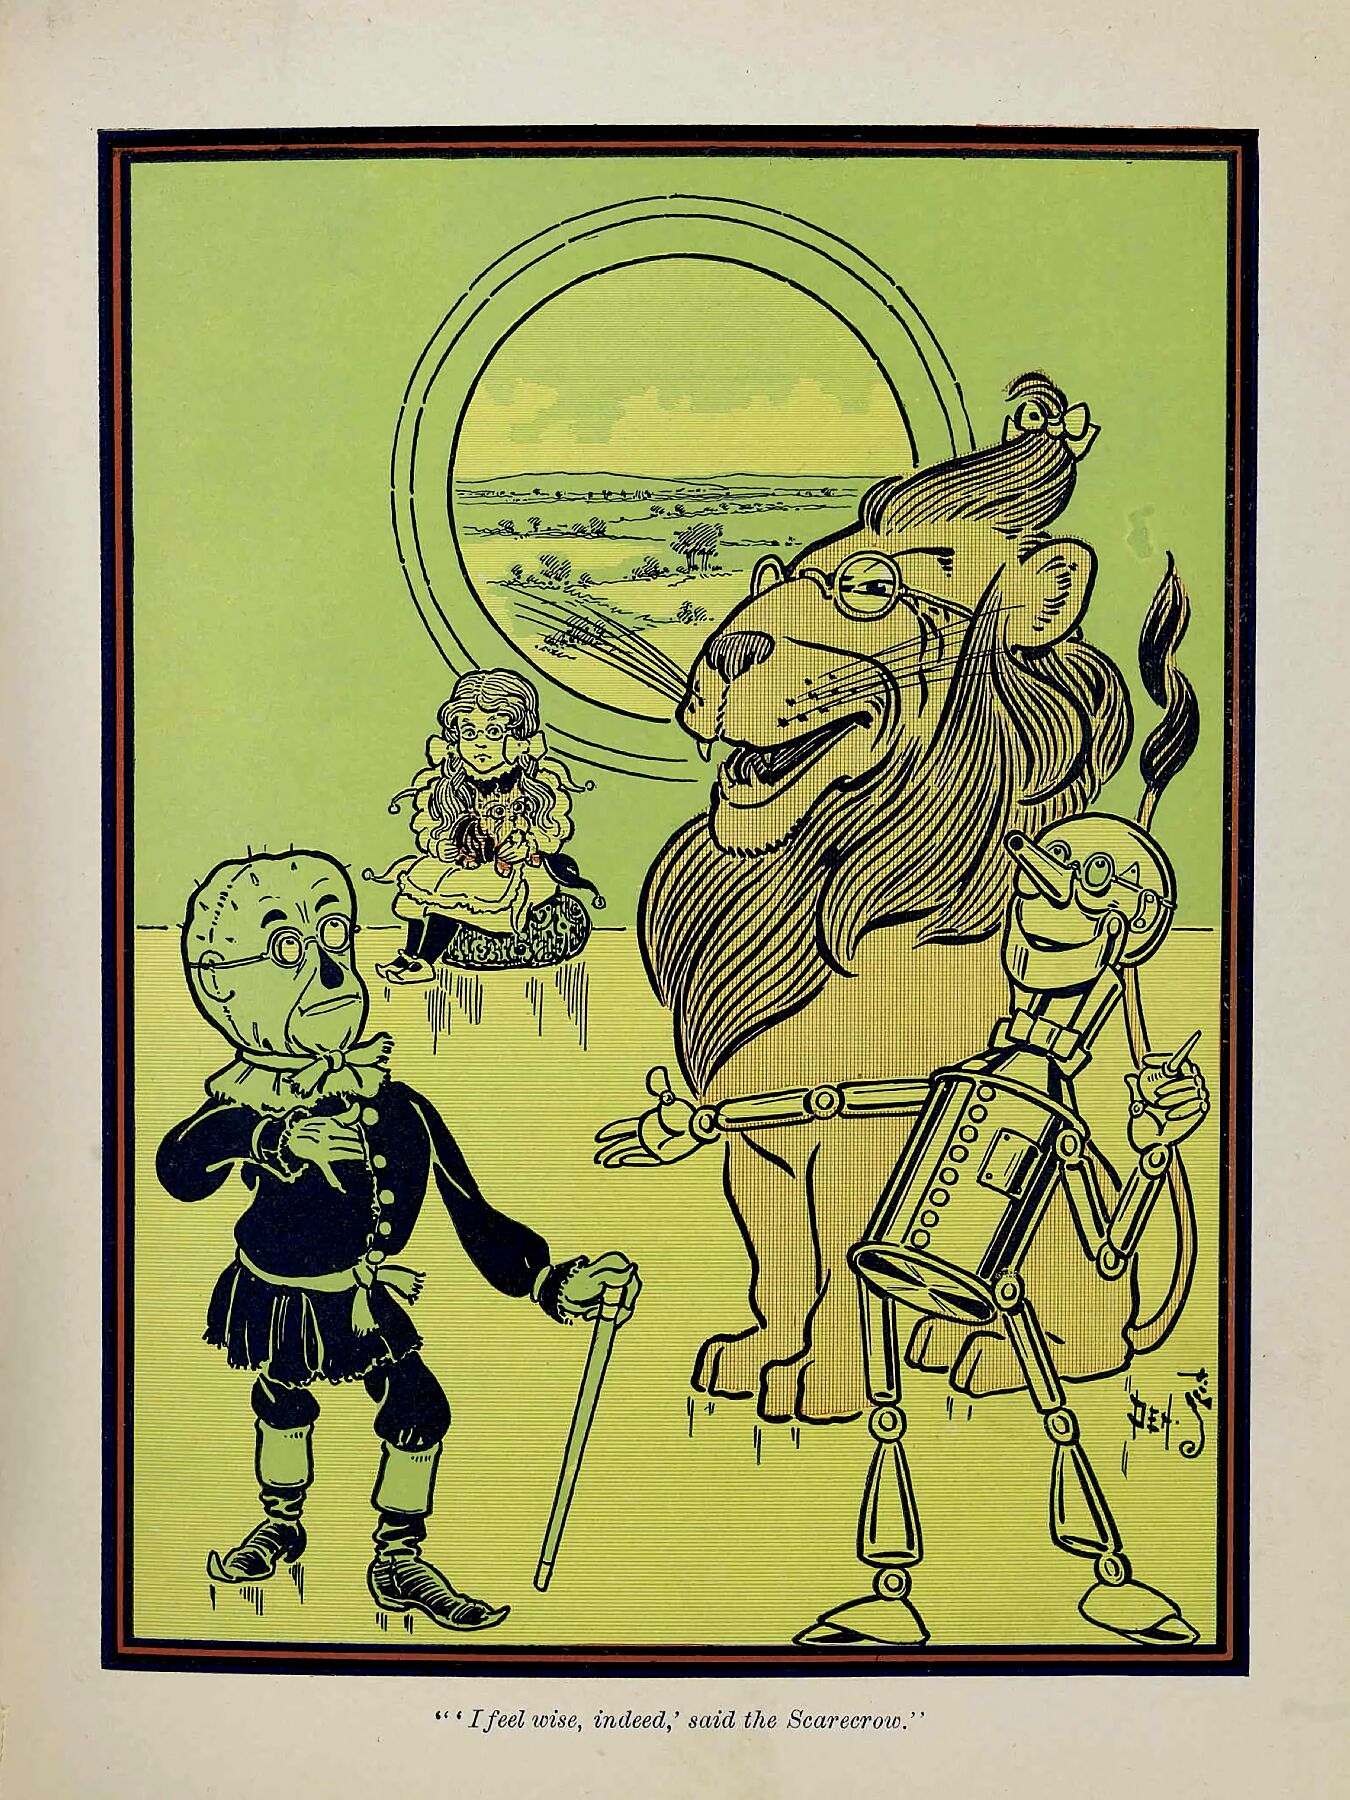 'I feel wise, indeed, said the Scarecrow' by W. W. Denslow for the Wonderful Wizard of Oz - 1900